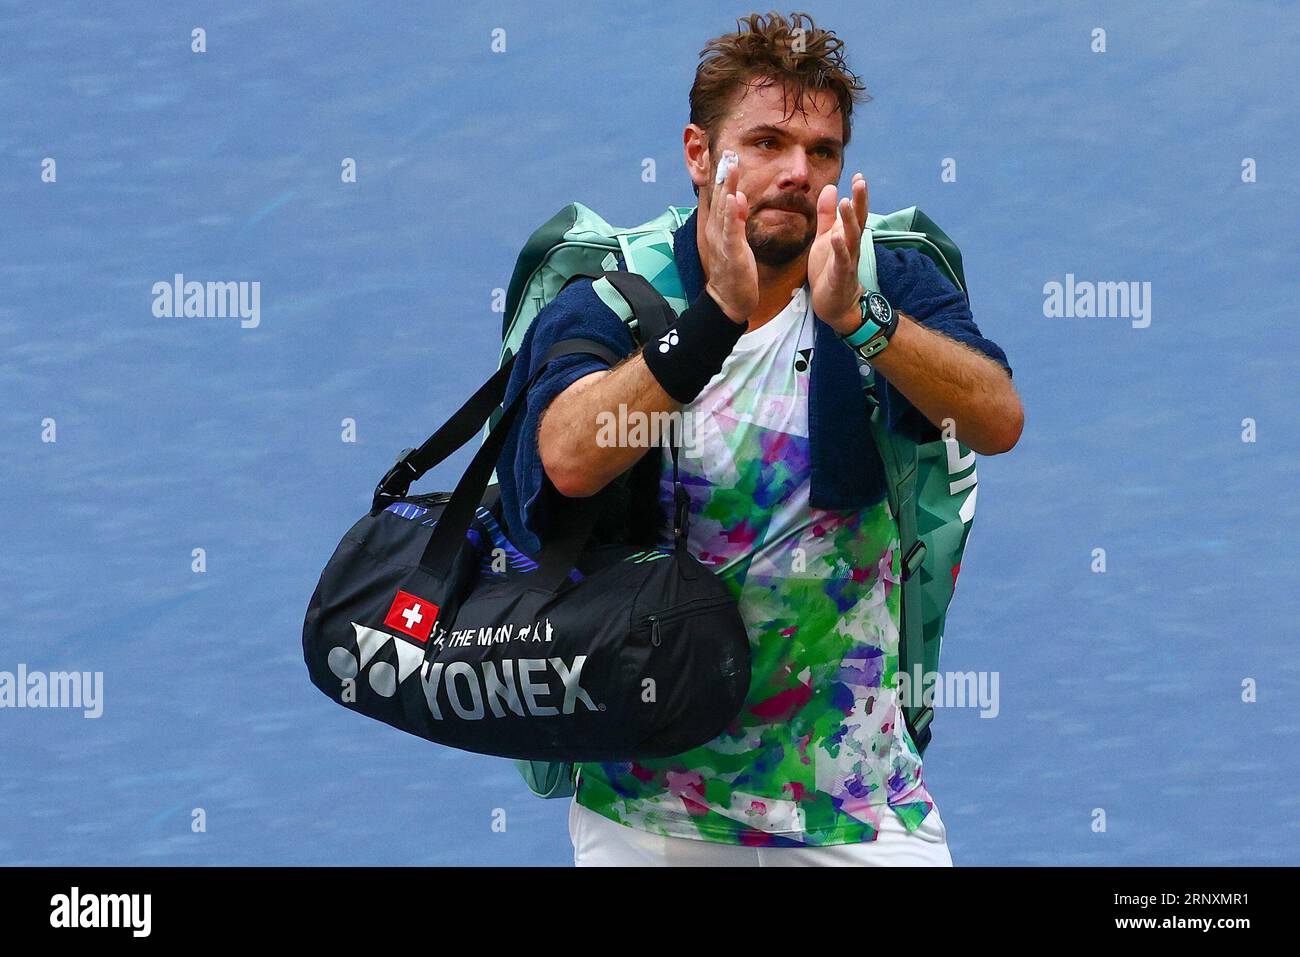 Stan Wawrinka, of Switzerland, reacts to the crowd as he walks off the court after losing to Jannik Sinner, of Italy, during the third round of the U.S